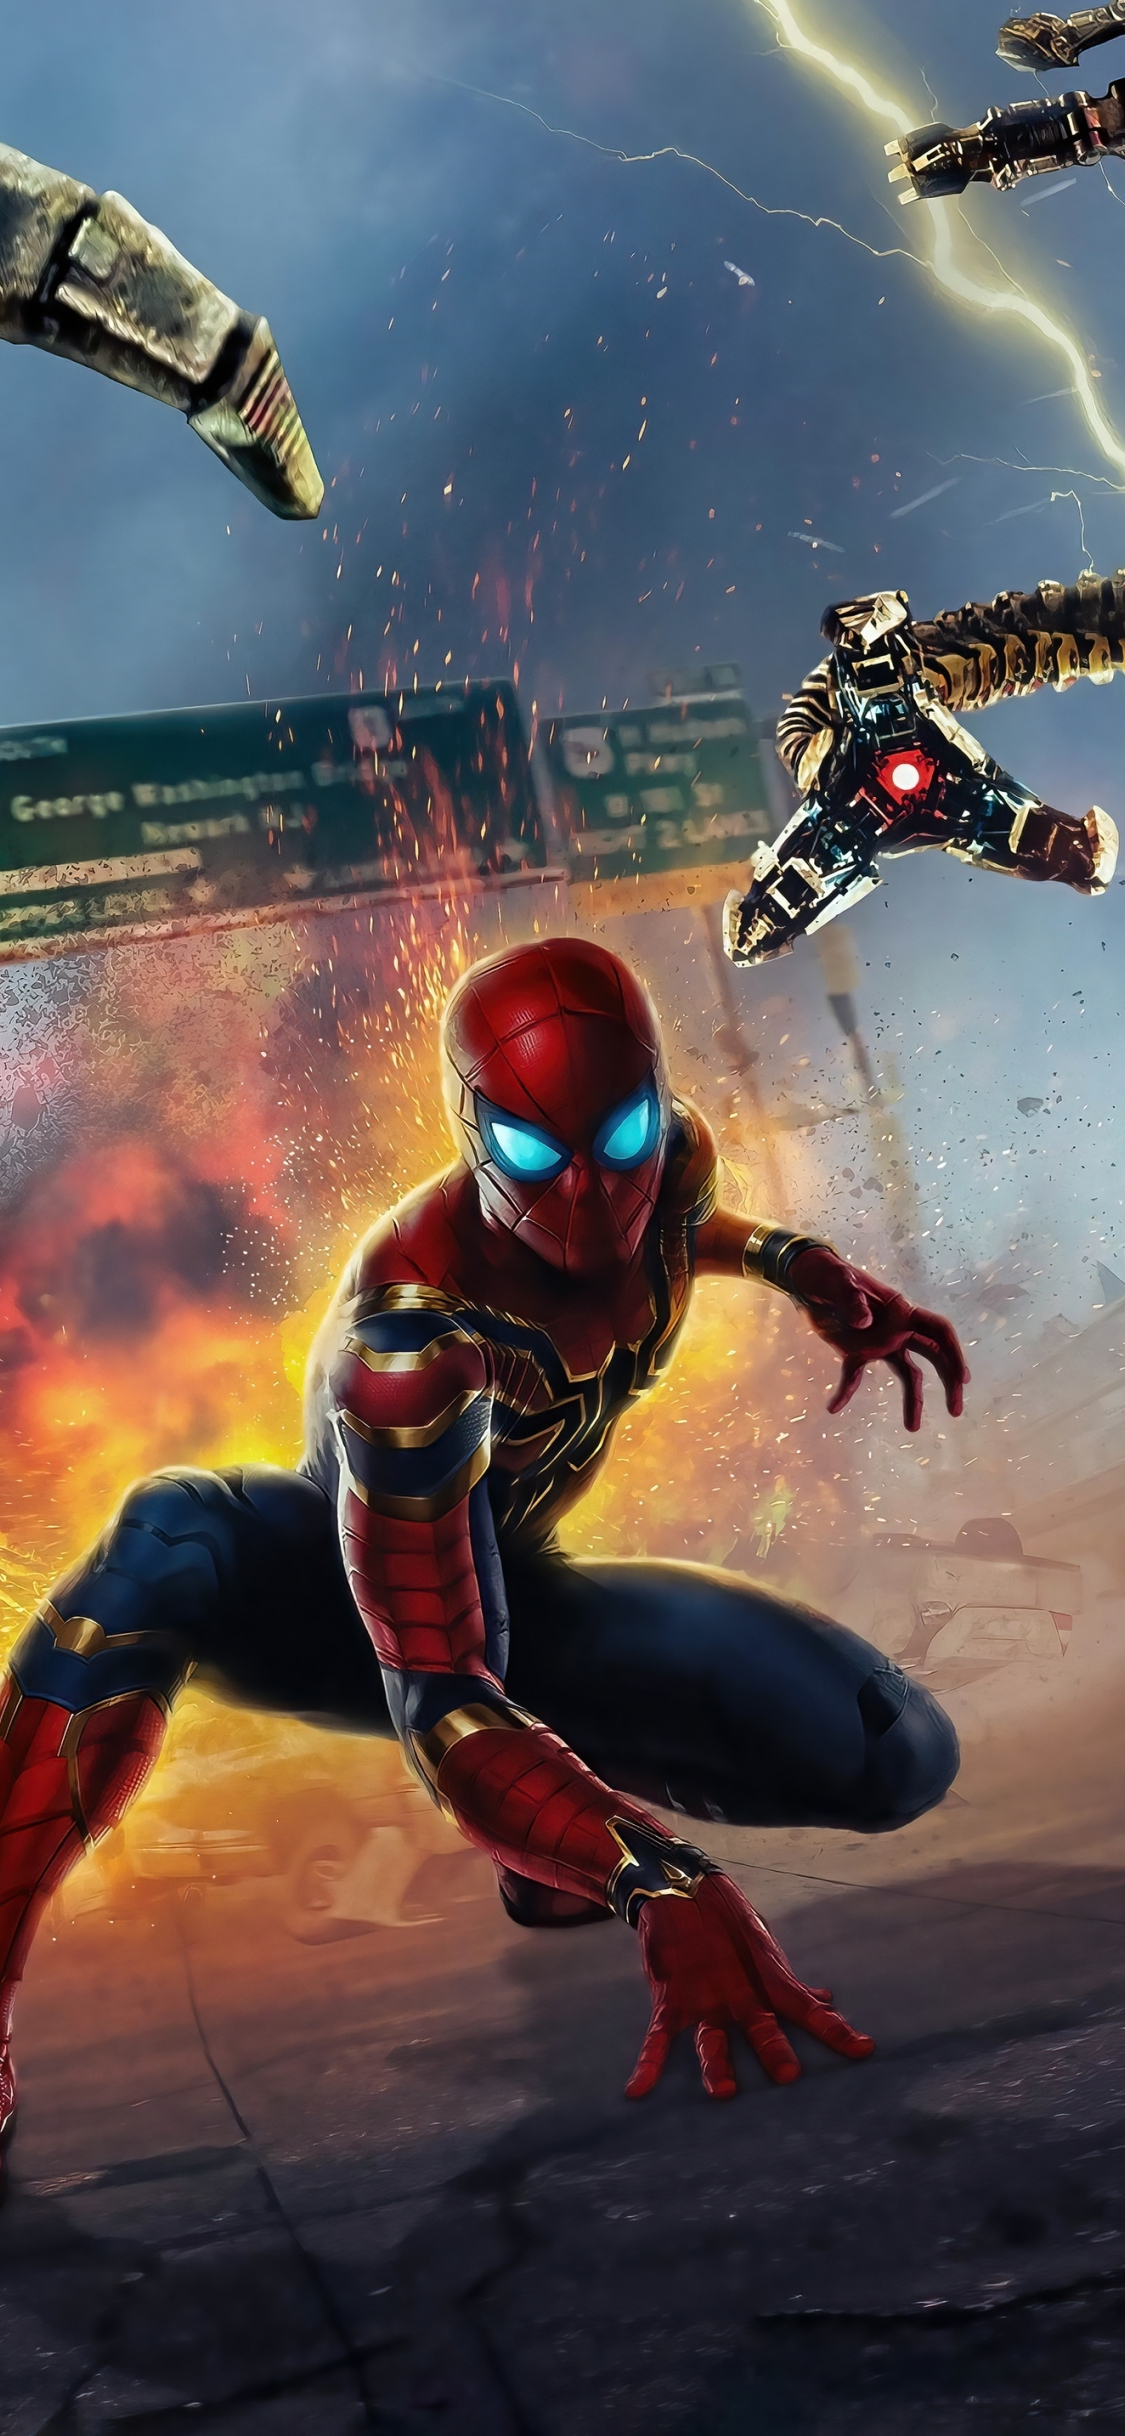 Download wallpaper 1125x2436 spider-man: no way home, movie poster, new suit,  iphone x, 1125x2436 hd background, 27861